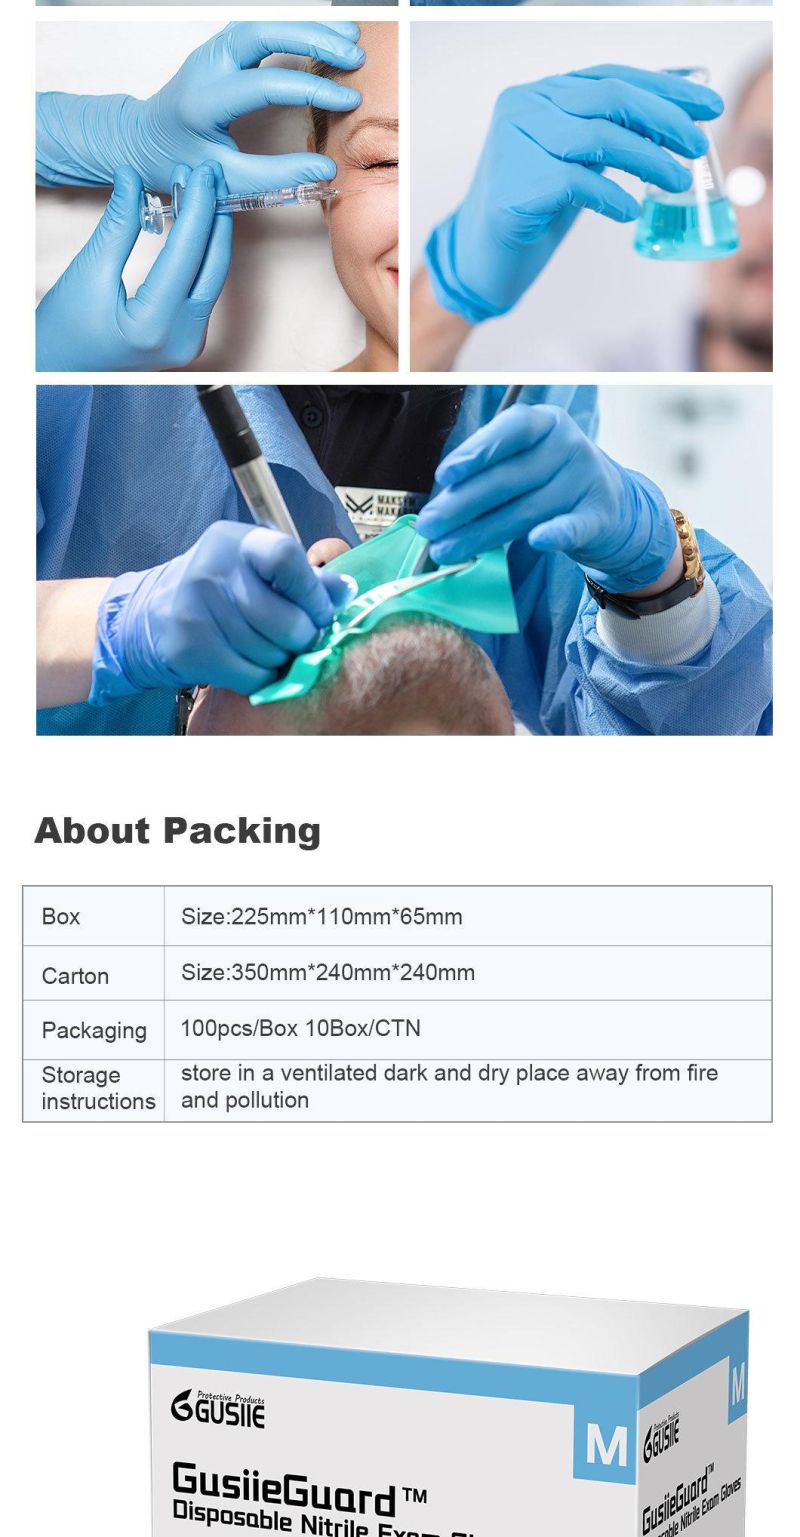 in Stock Nitrile Examination Gloves Factory with CE and FDA